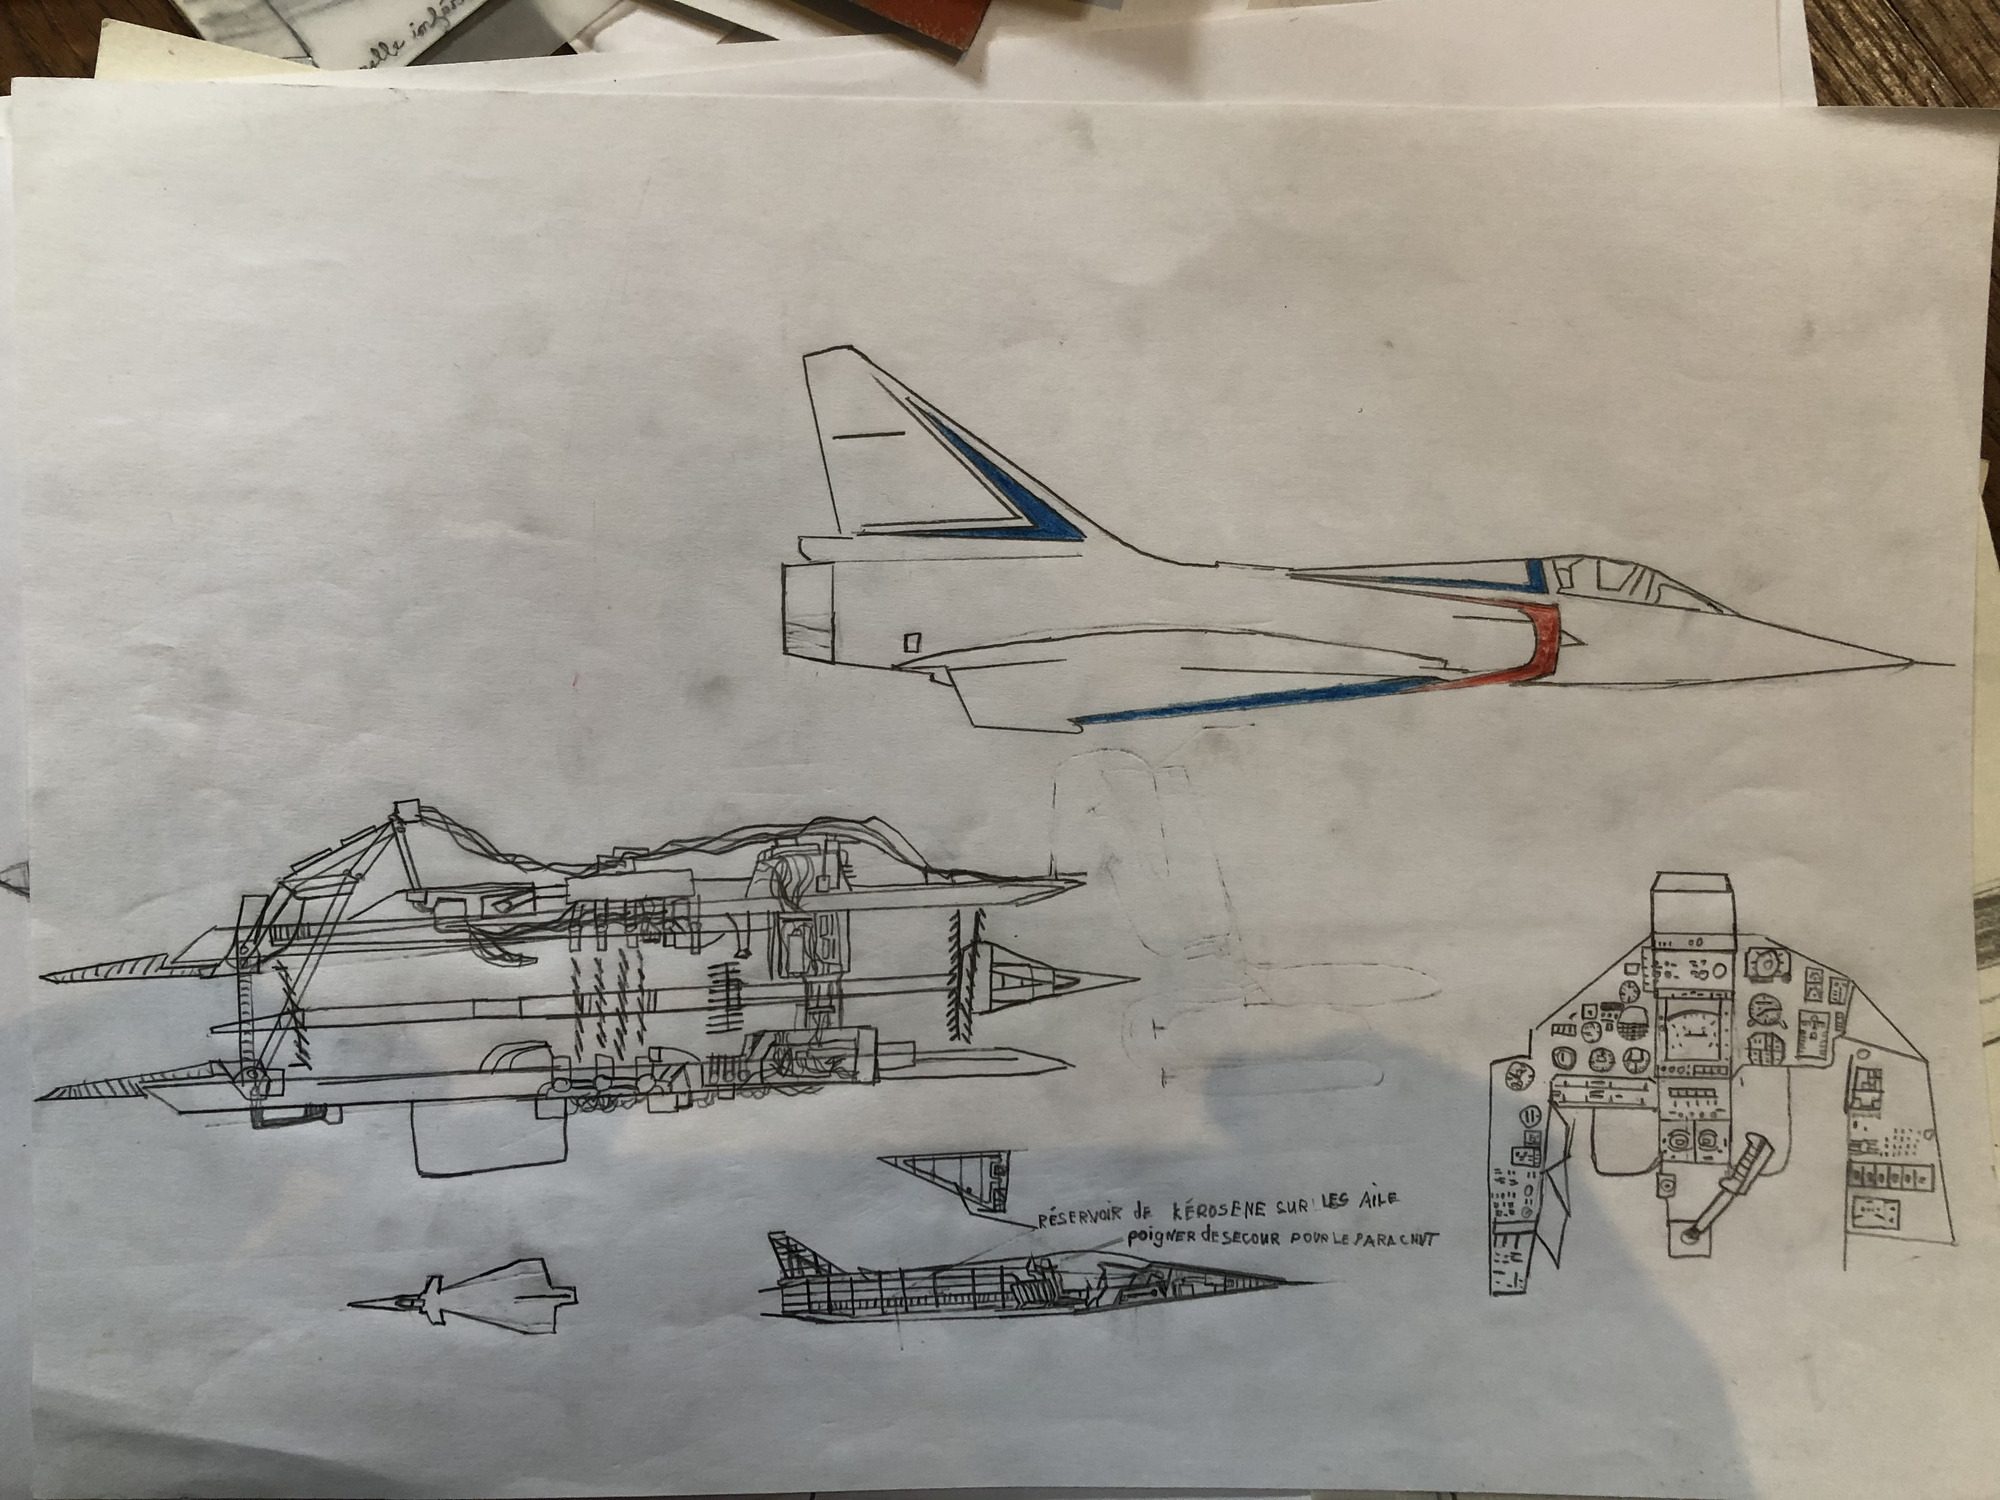 Drawing of a Rafale and its engine.